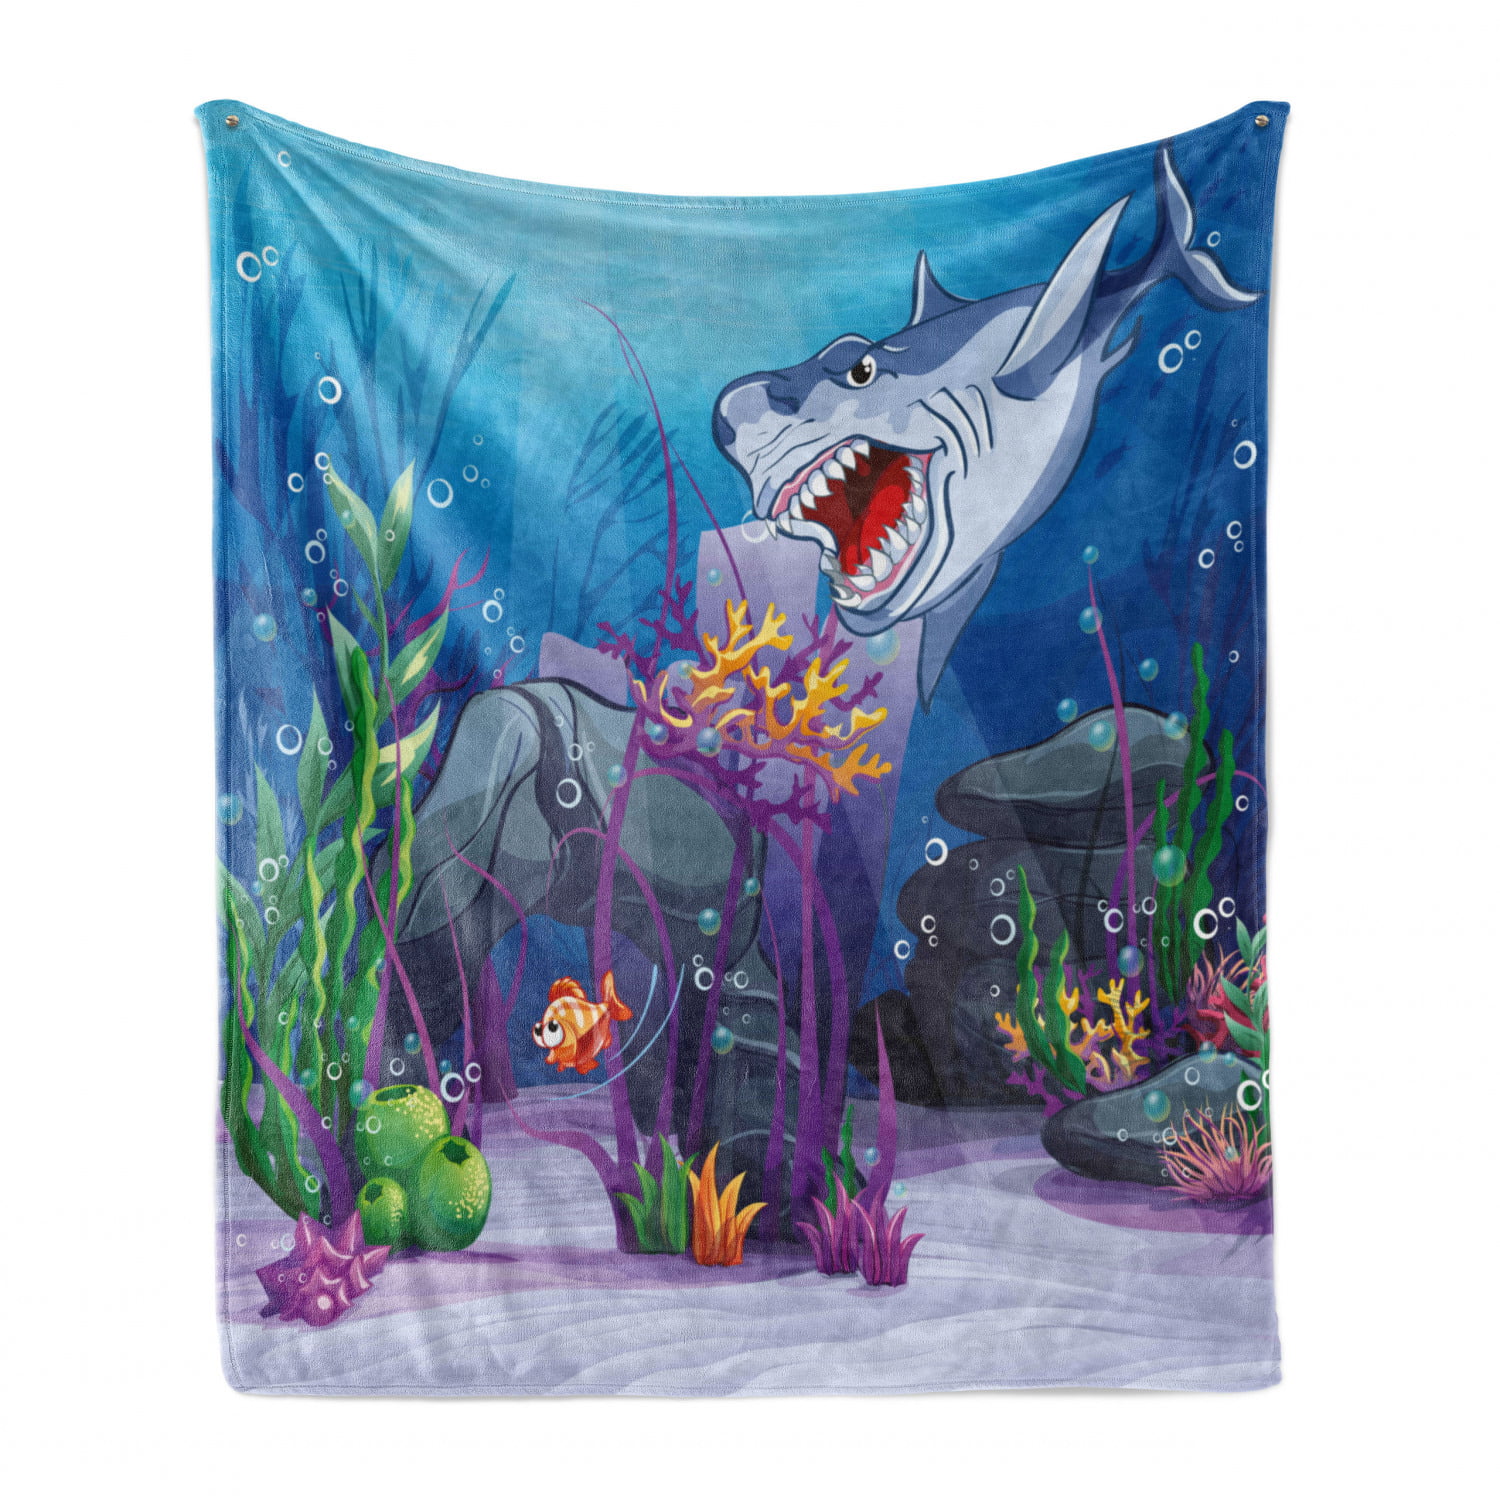 70 x 90 Cartoon Graphic Like Image of Deep Sealife Creatures Fish Waves Shells Ambesonne Ocean Soft Flannel Fleece Throw Blanket Navy Blue Aqua and White Cozy Plush for Indoor and Outdoor Use 